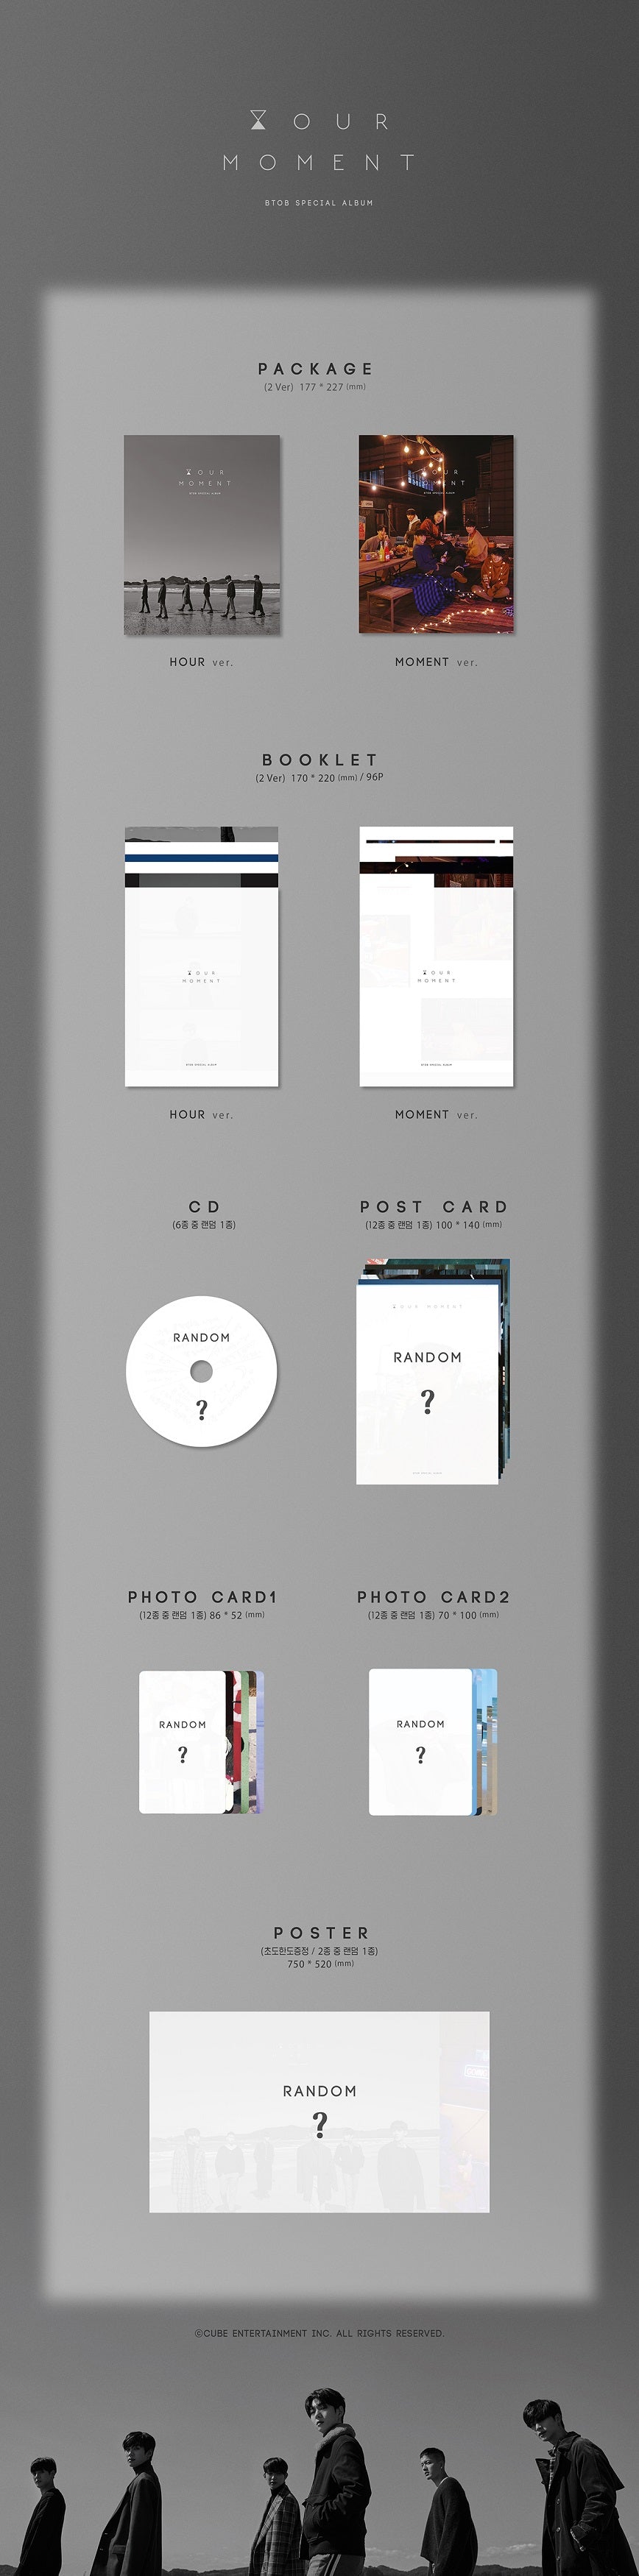 1 CD
1 Booklet (96 pages)
1 Post
2 Photo Cards